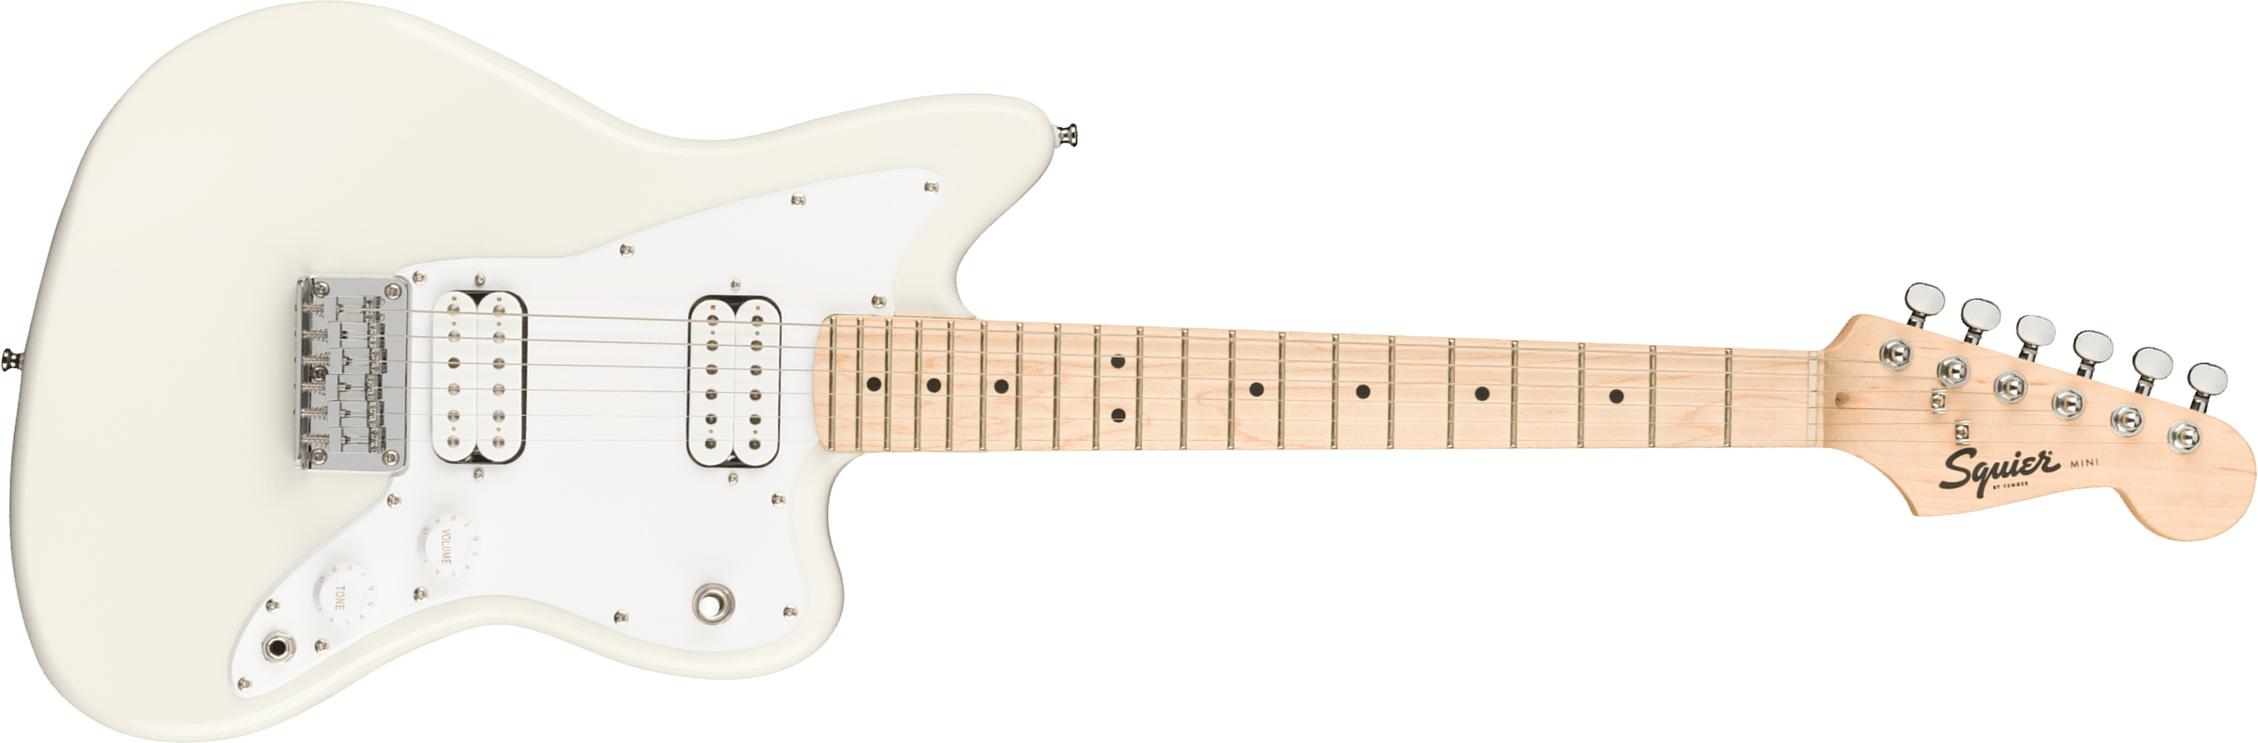 Squier Mini Jazzmaster Bullet Hh Ht Mn - Olympic White - Electric guitar for kids - Main picture